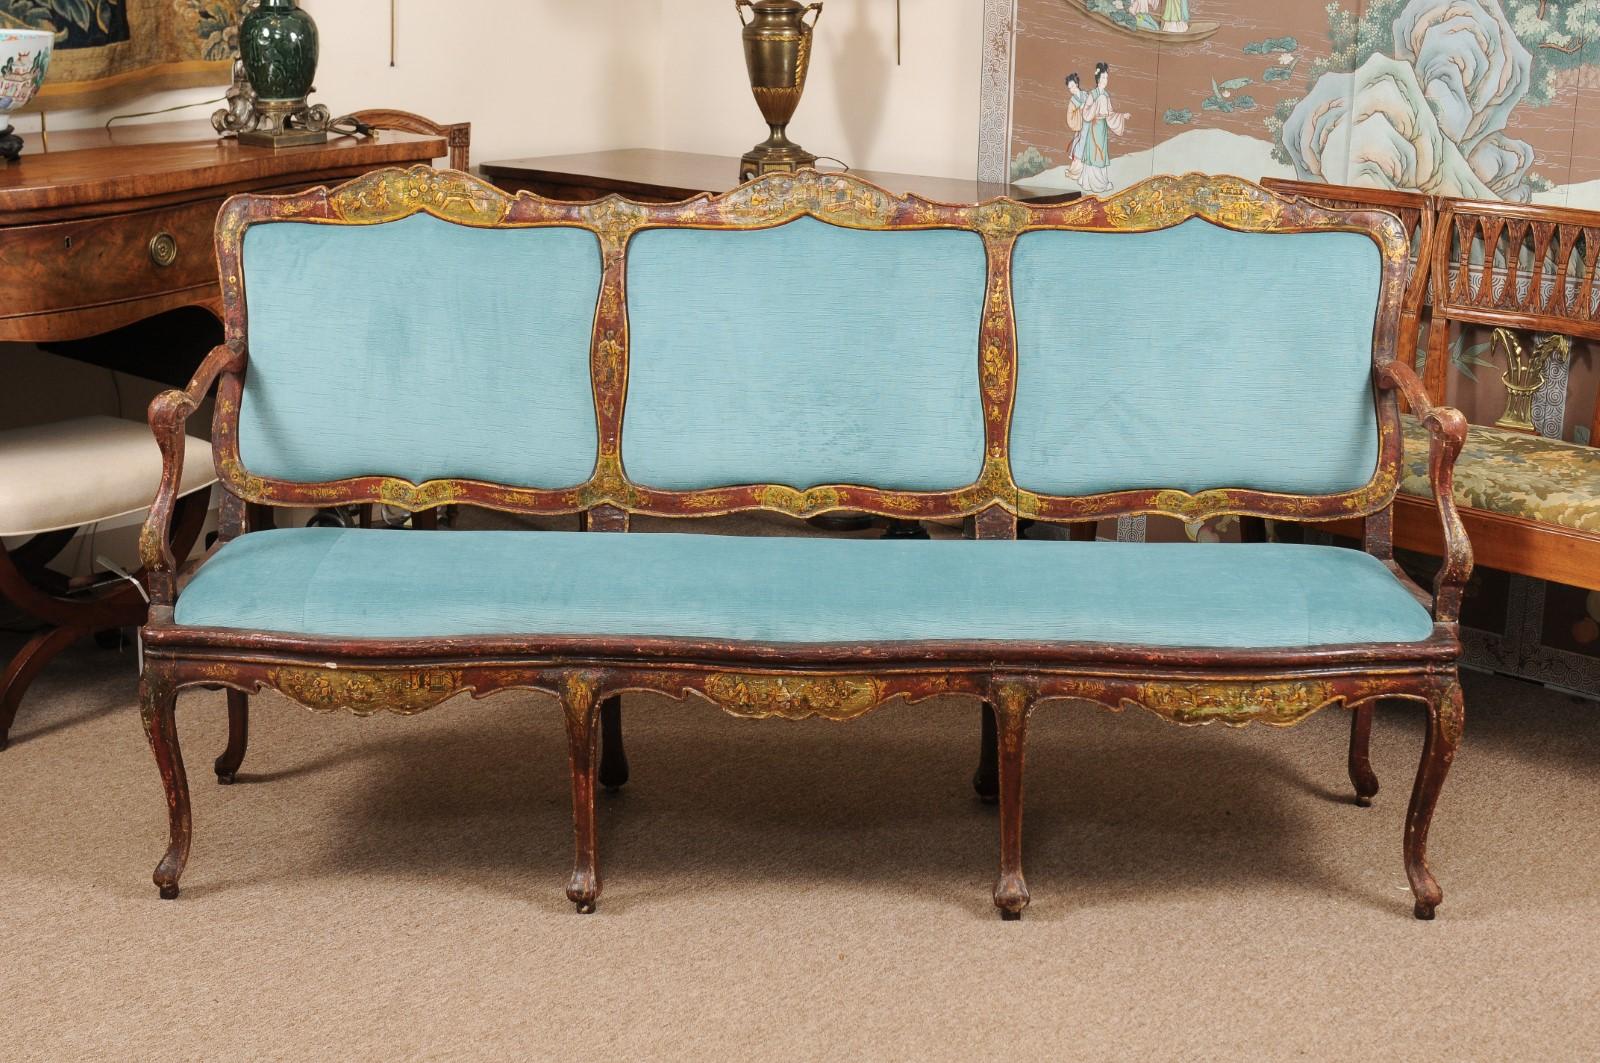 Chinoiserie painted triple back canape in hues of red, gold, and turquoise with removable upholstered seat and back panels, 18th century, Italy.